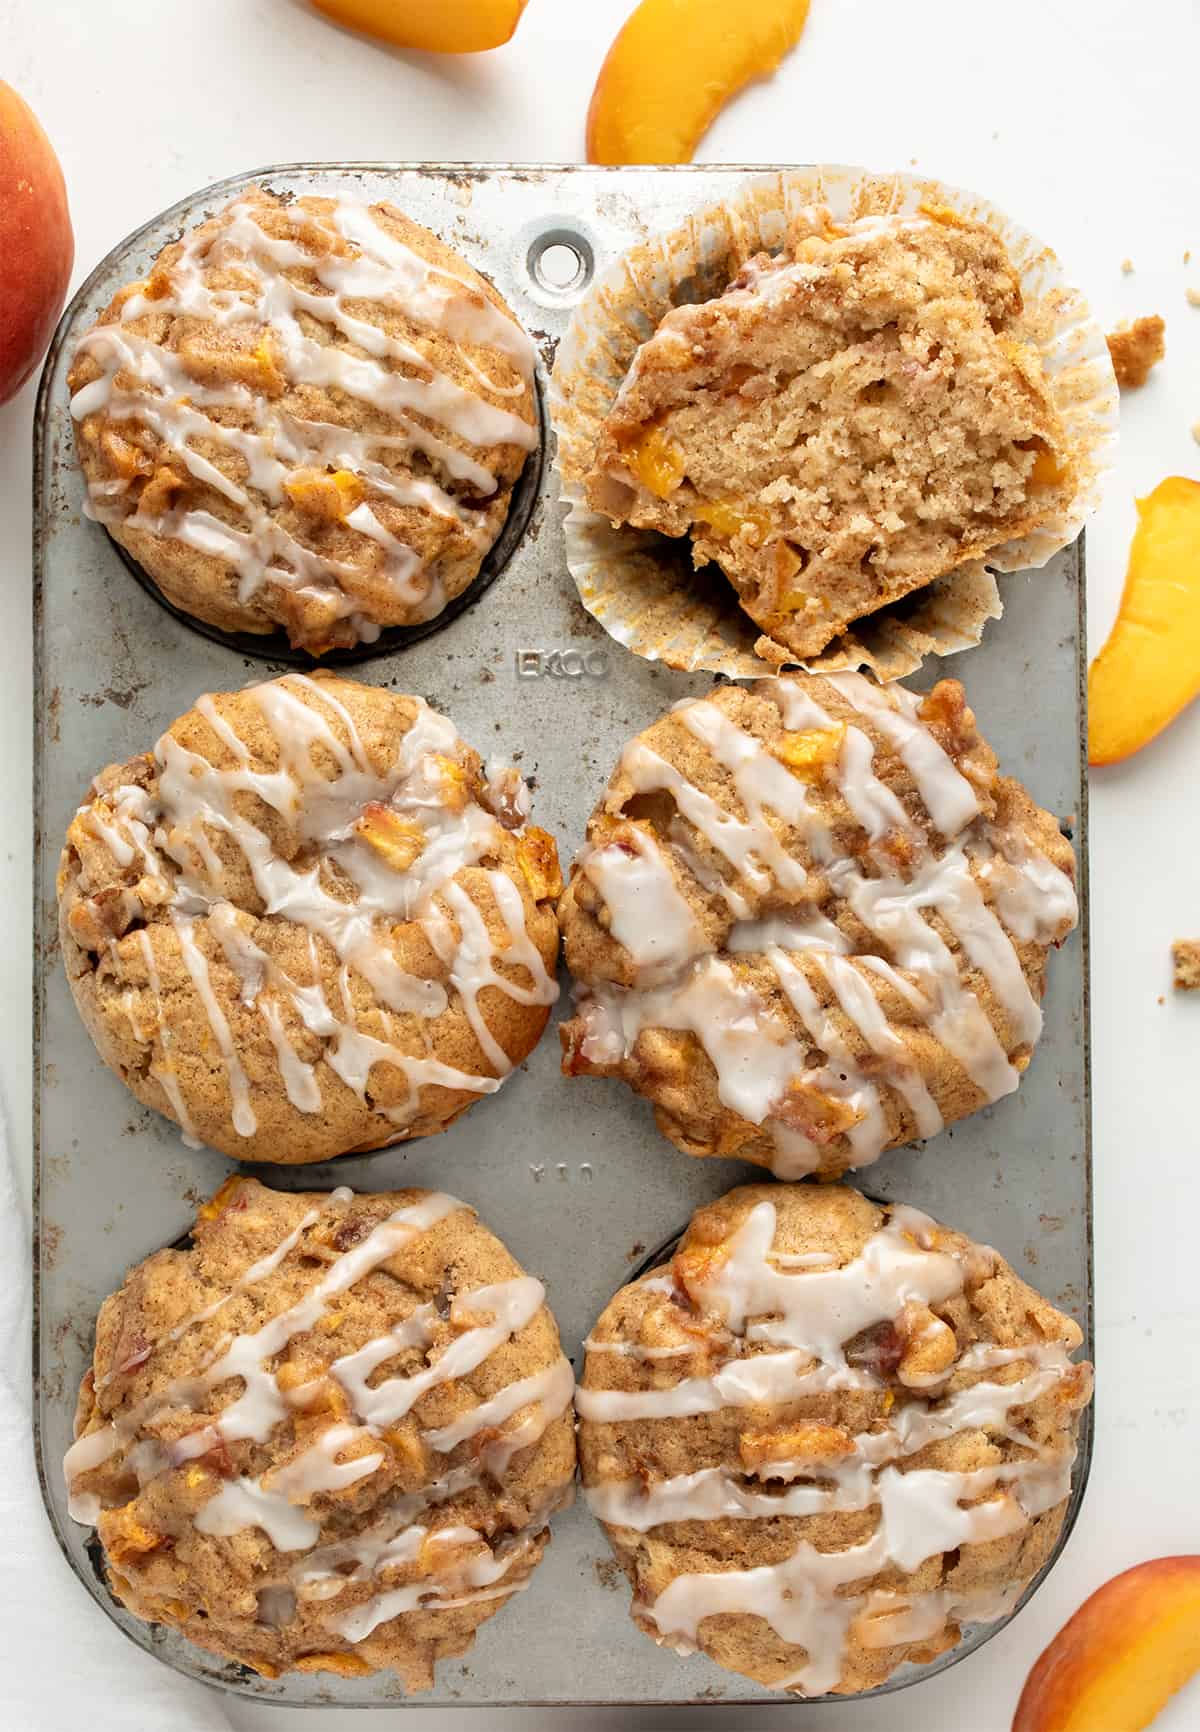 Peach Muffins in a Pan with One Cut in Half Showing Crumb on a White Counter.